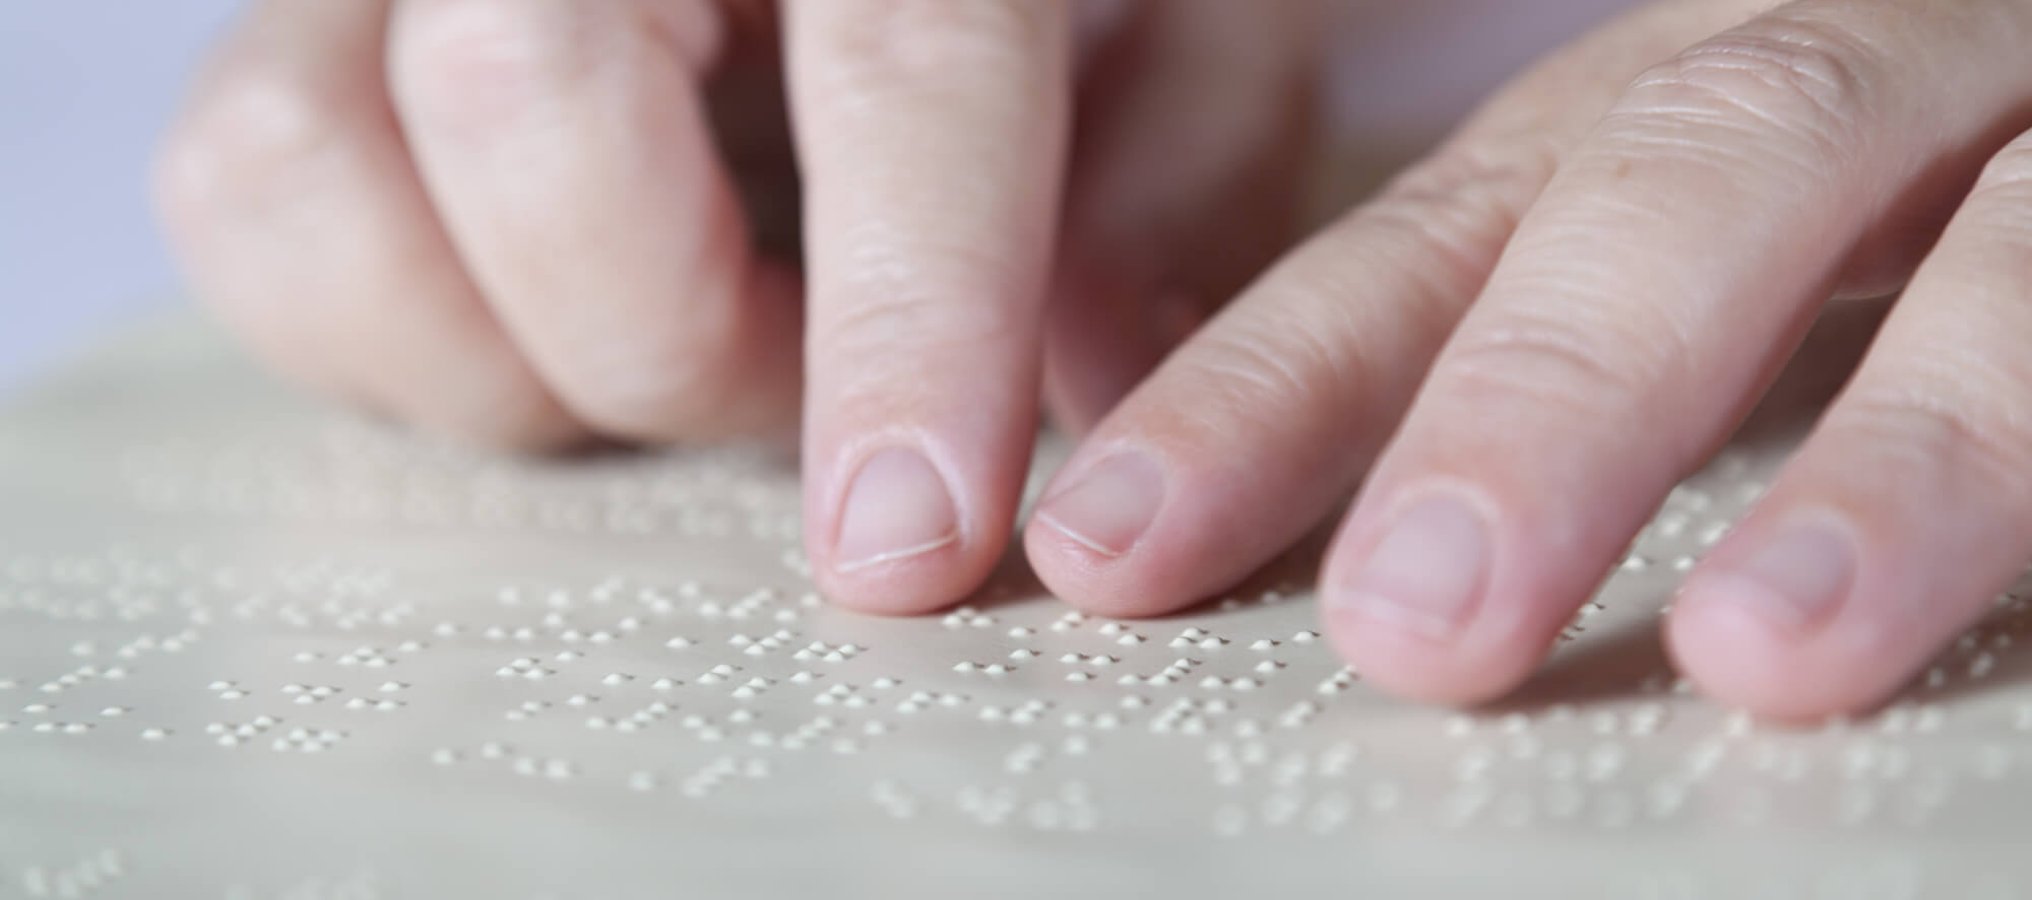 World Braille Day (4th January) Days Of The Year